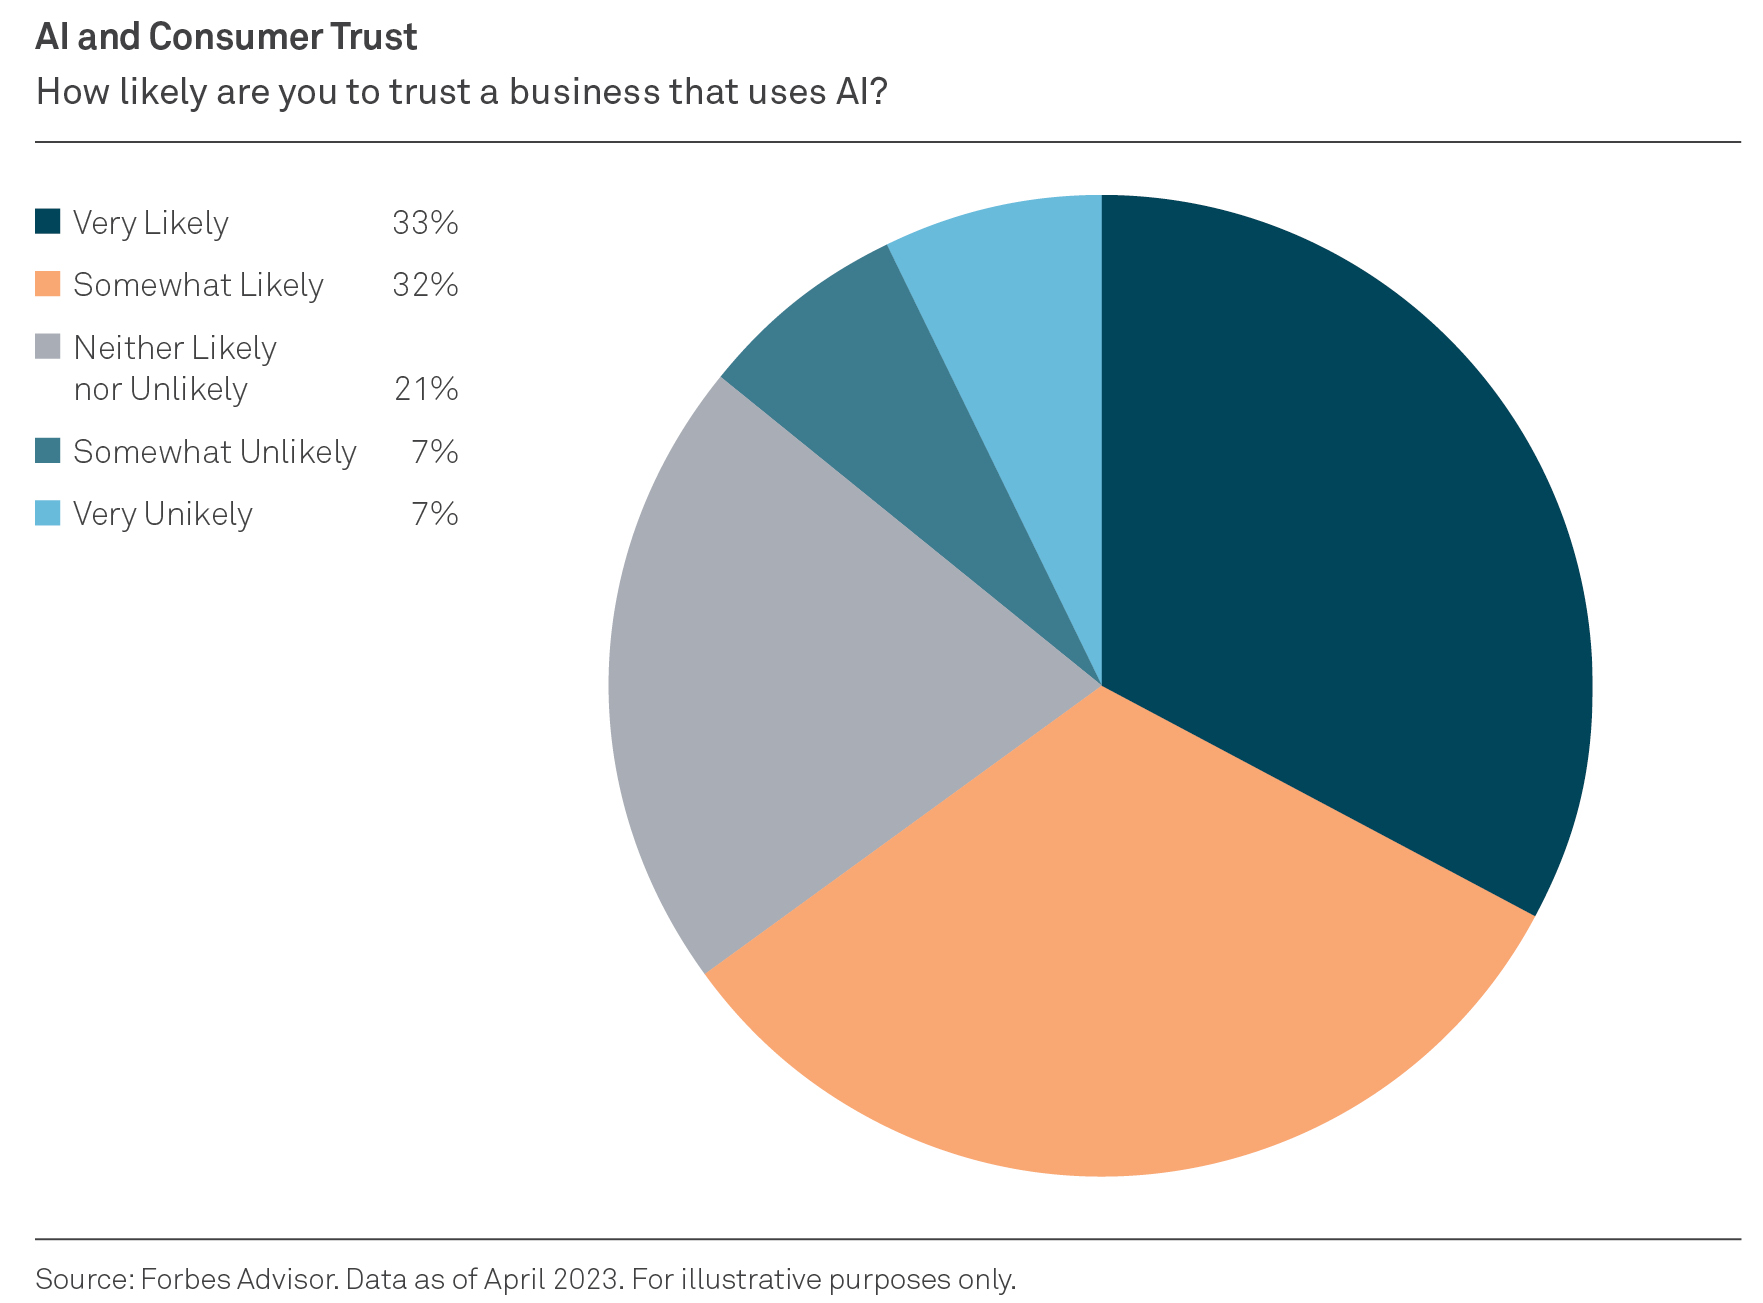 Pie chart indicating how likely consumers are to trust
businesses that use artificial intelligence (AI)